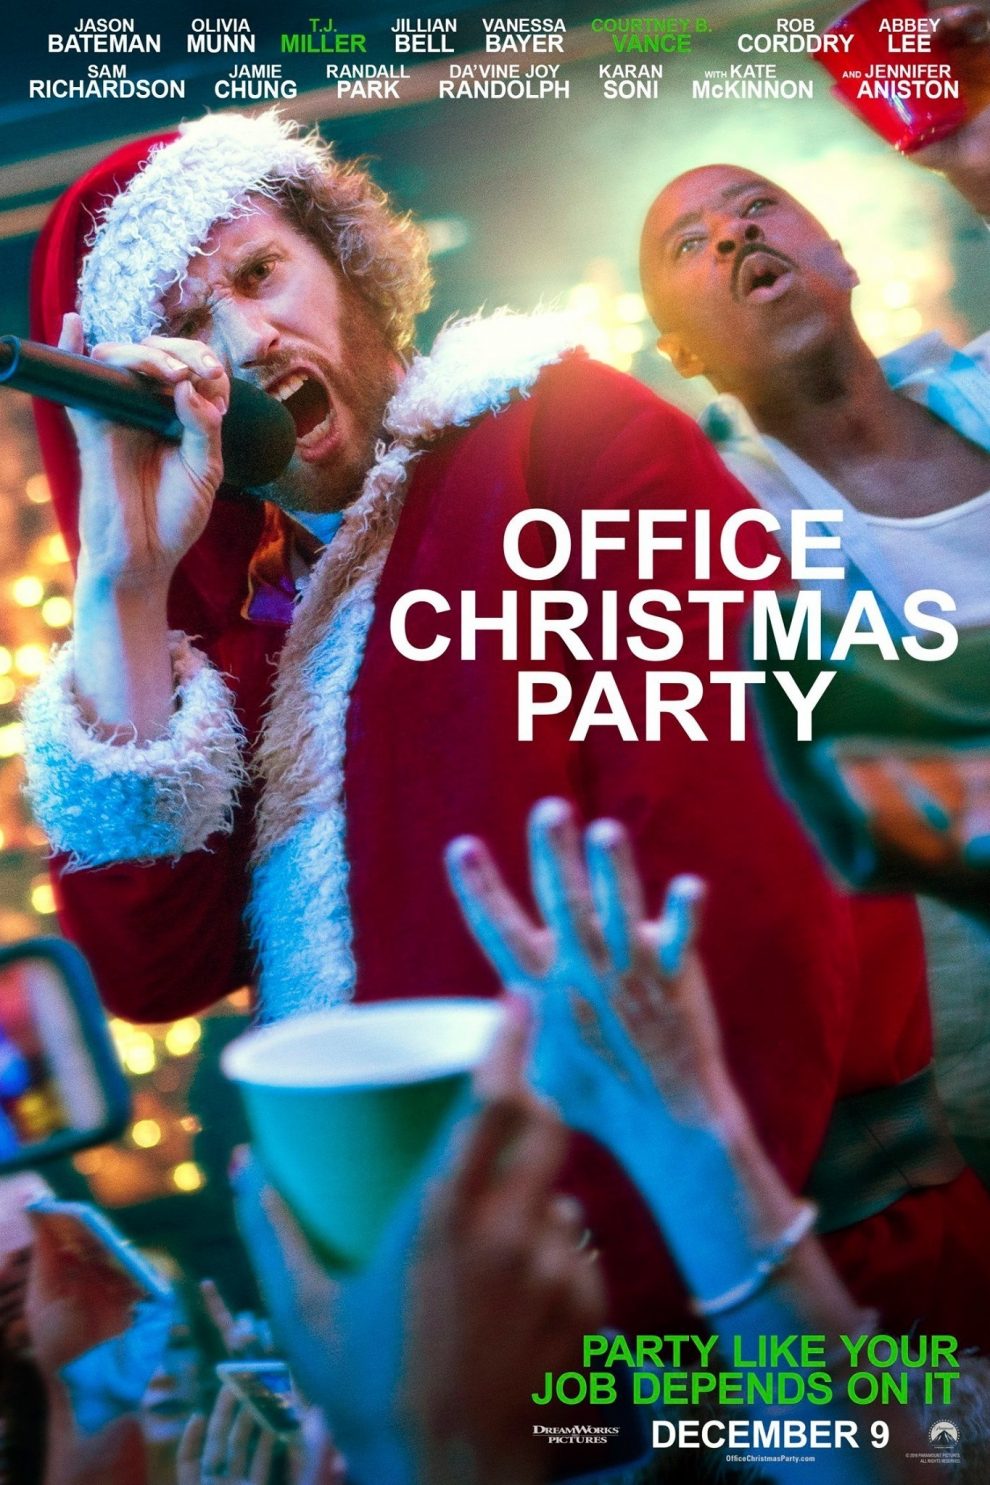 Poster for the movie "Office Christmas Party"